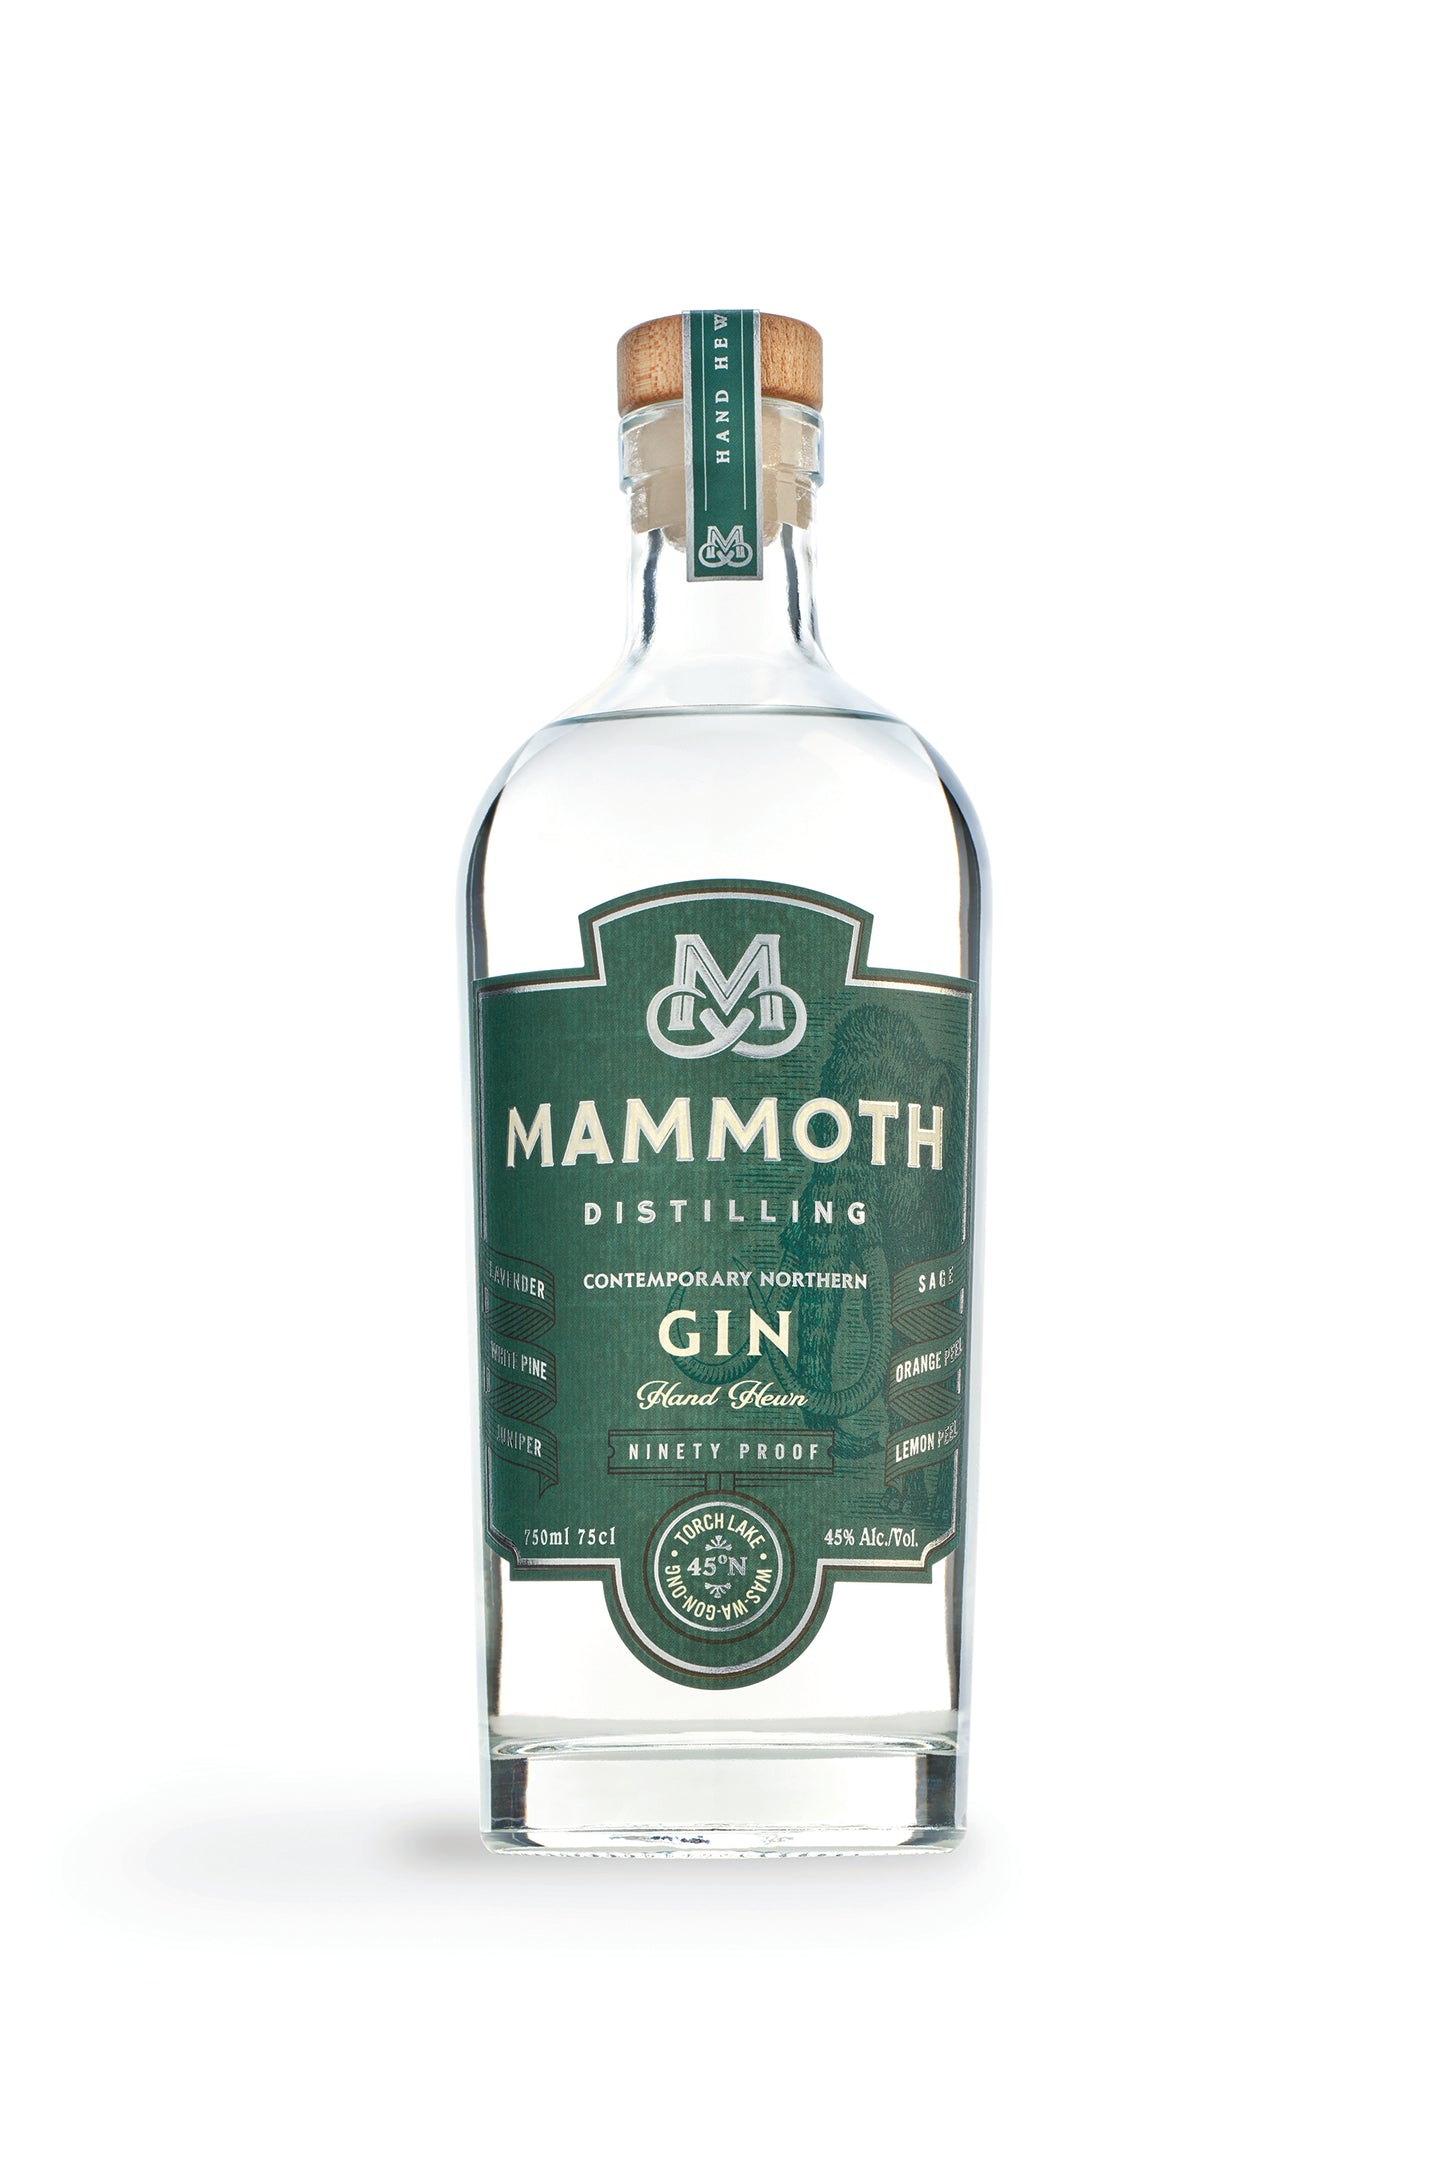 Mammoth Contemporary Northern Gin